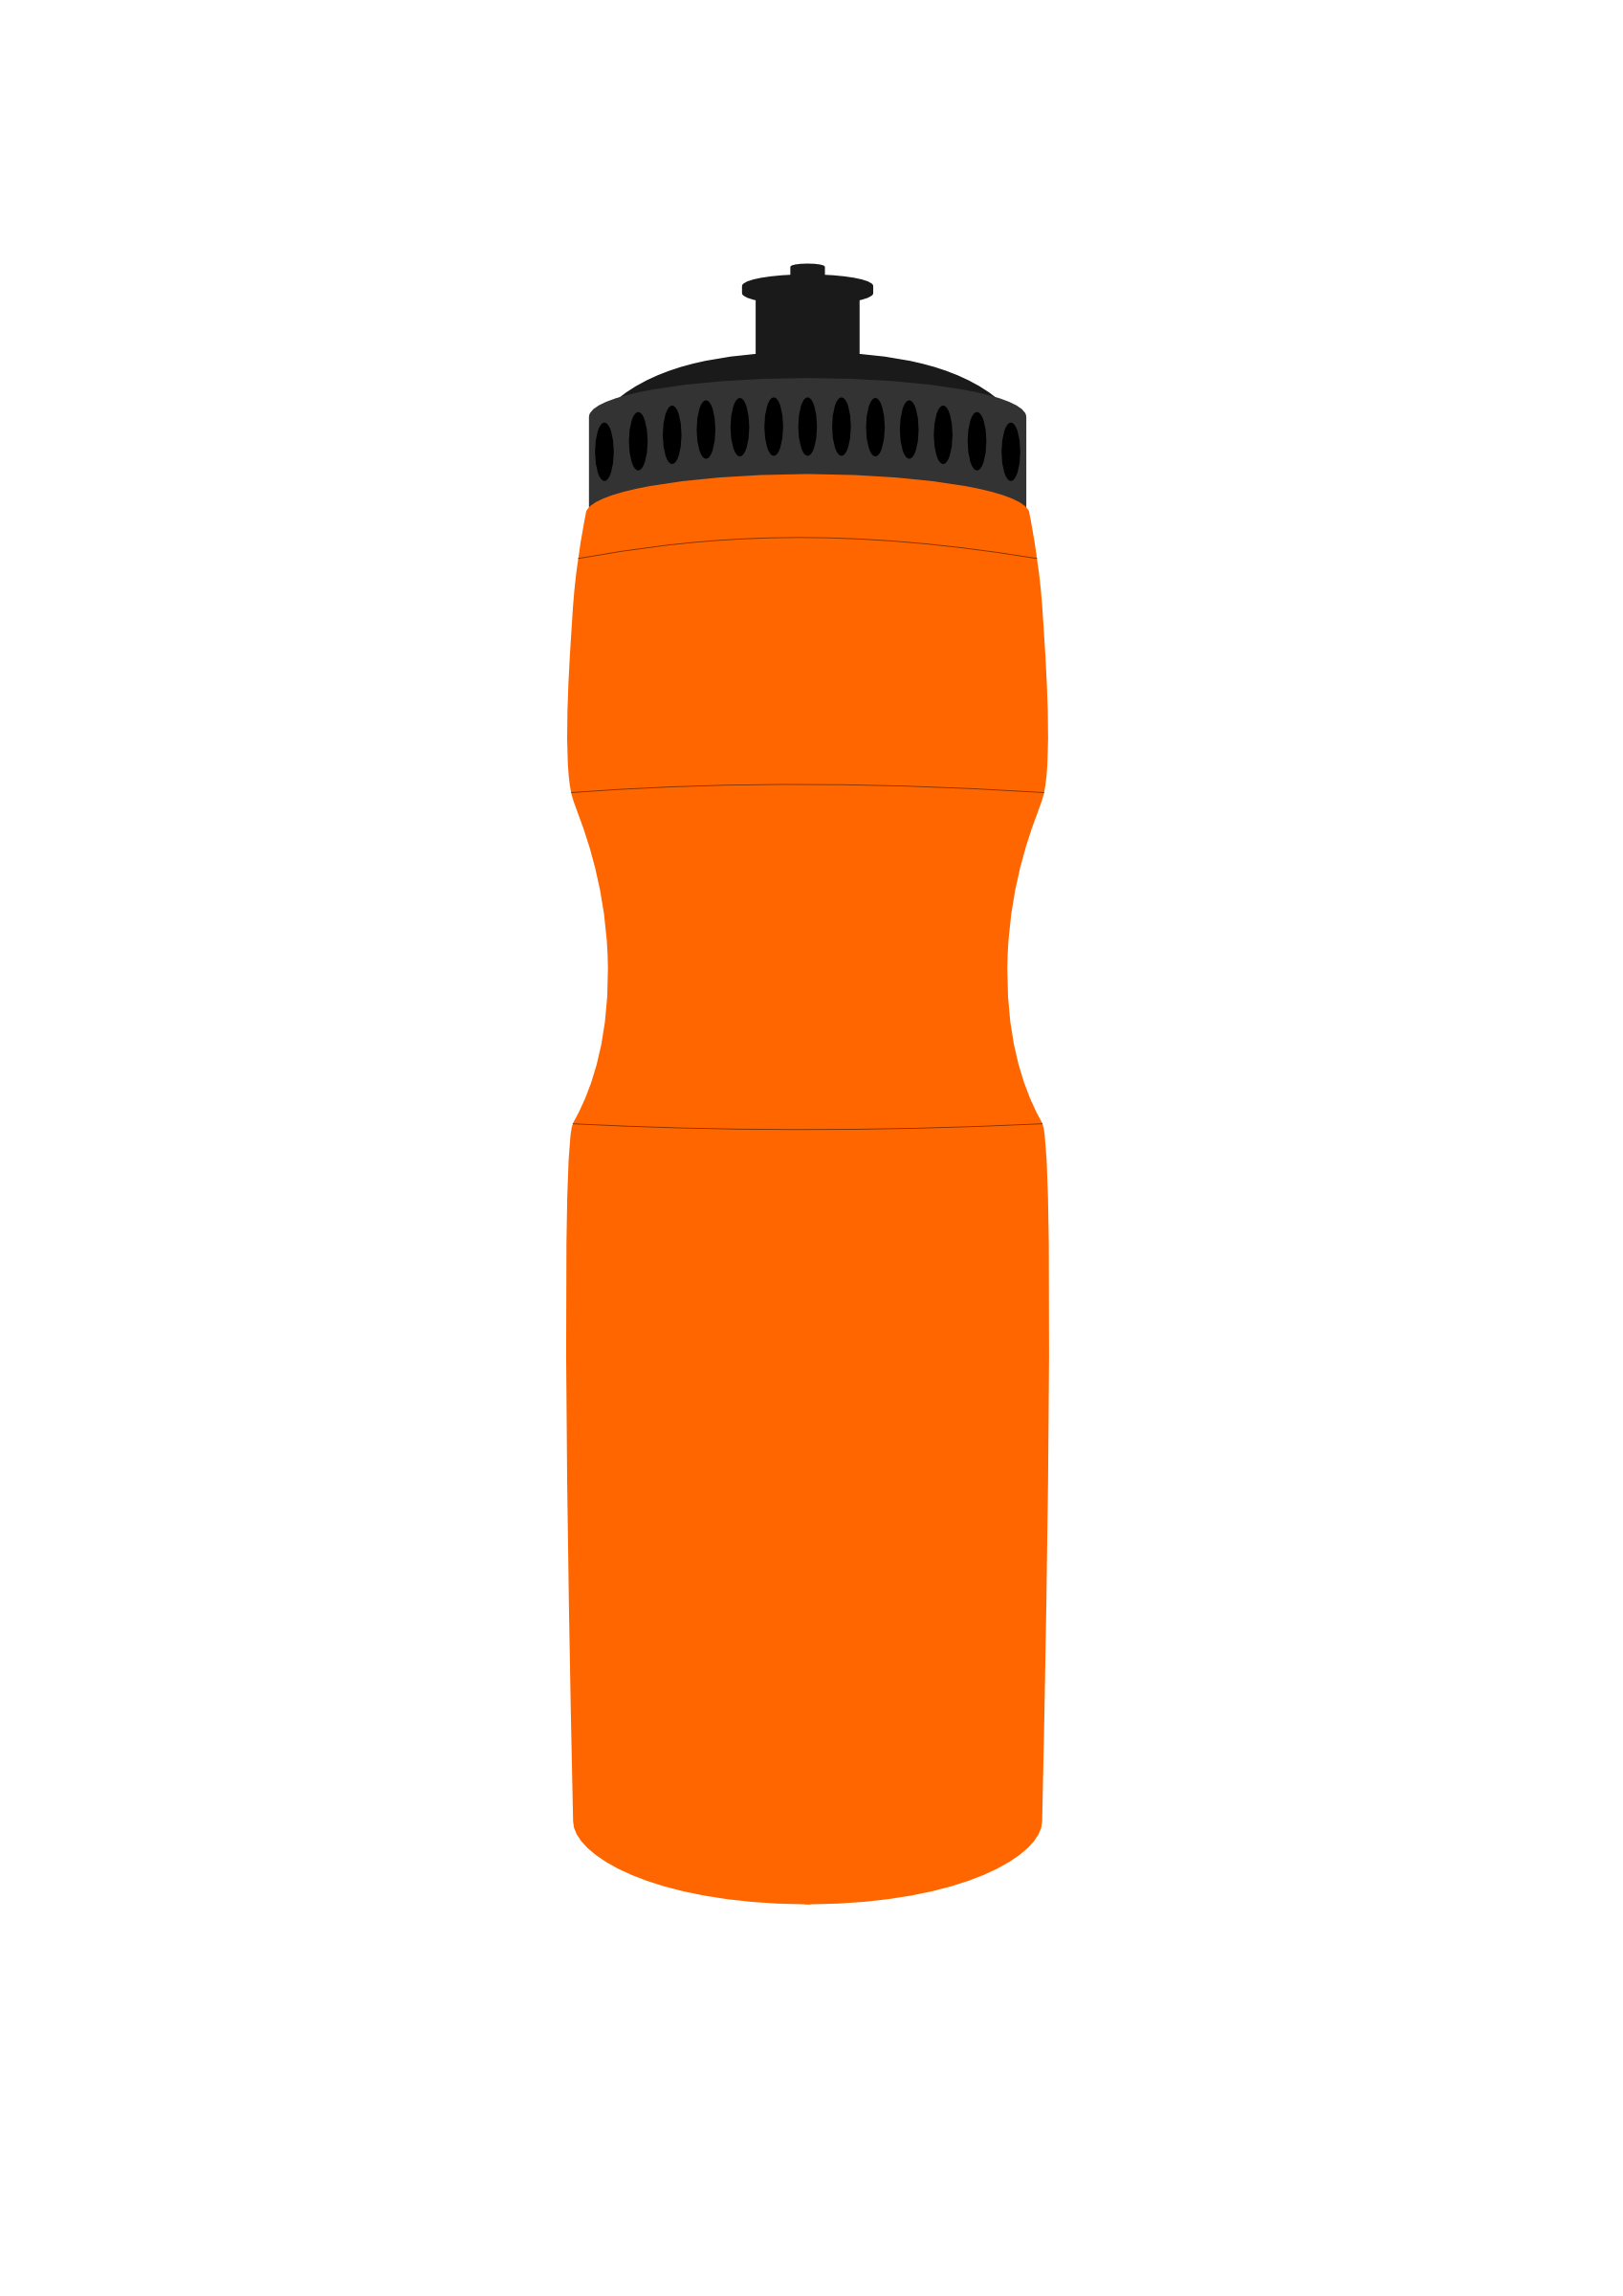 Water bottle clipart free images 4